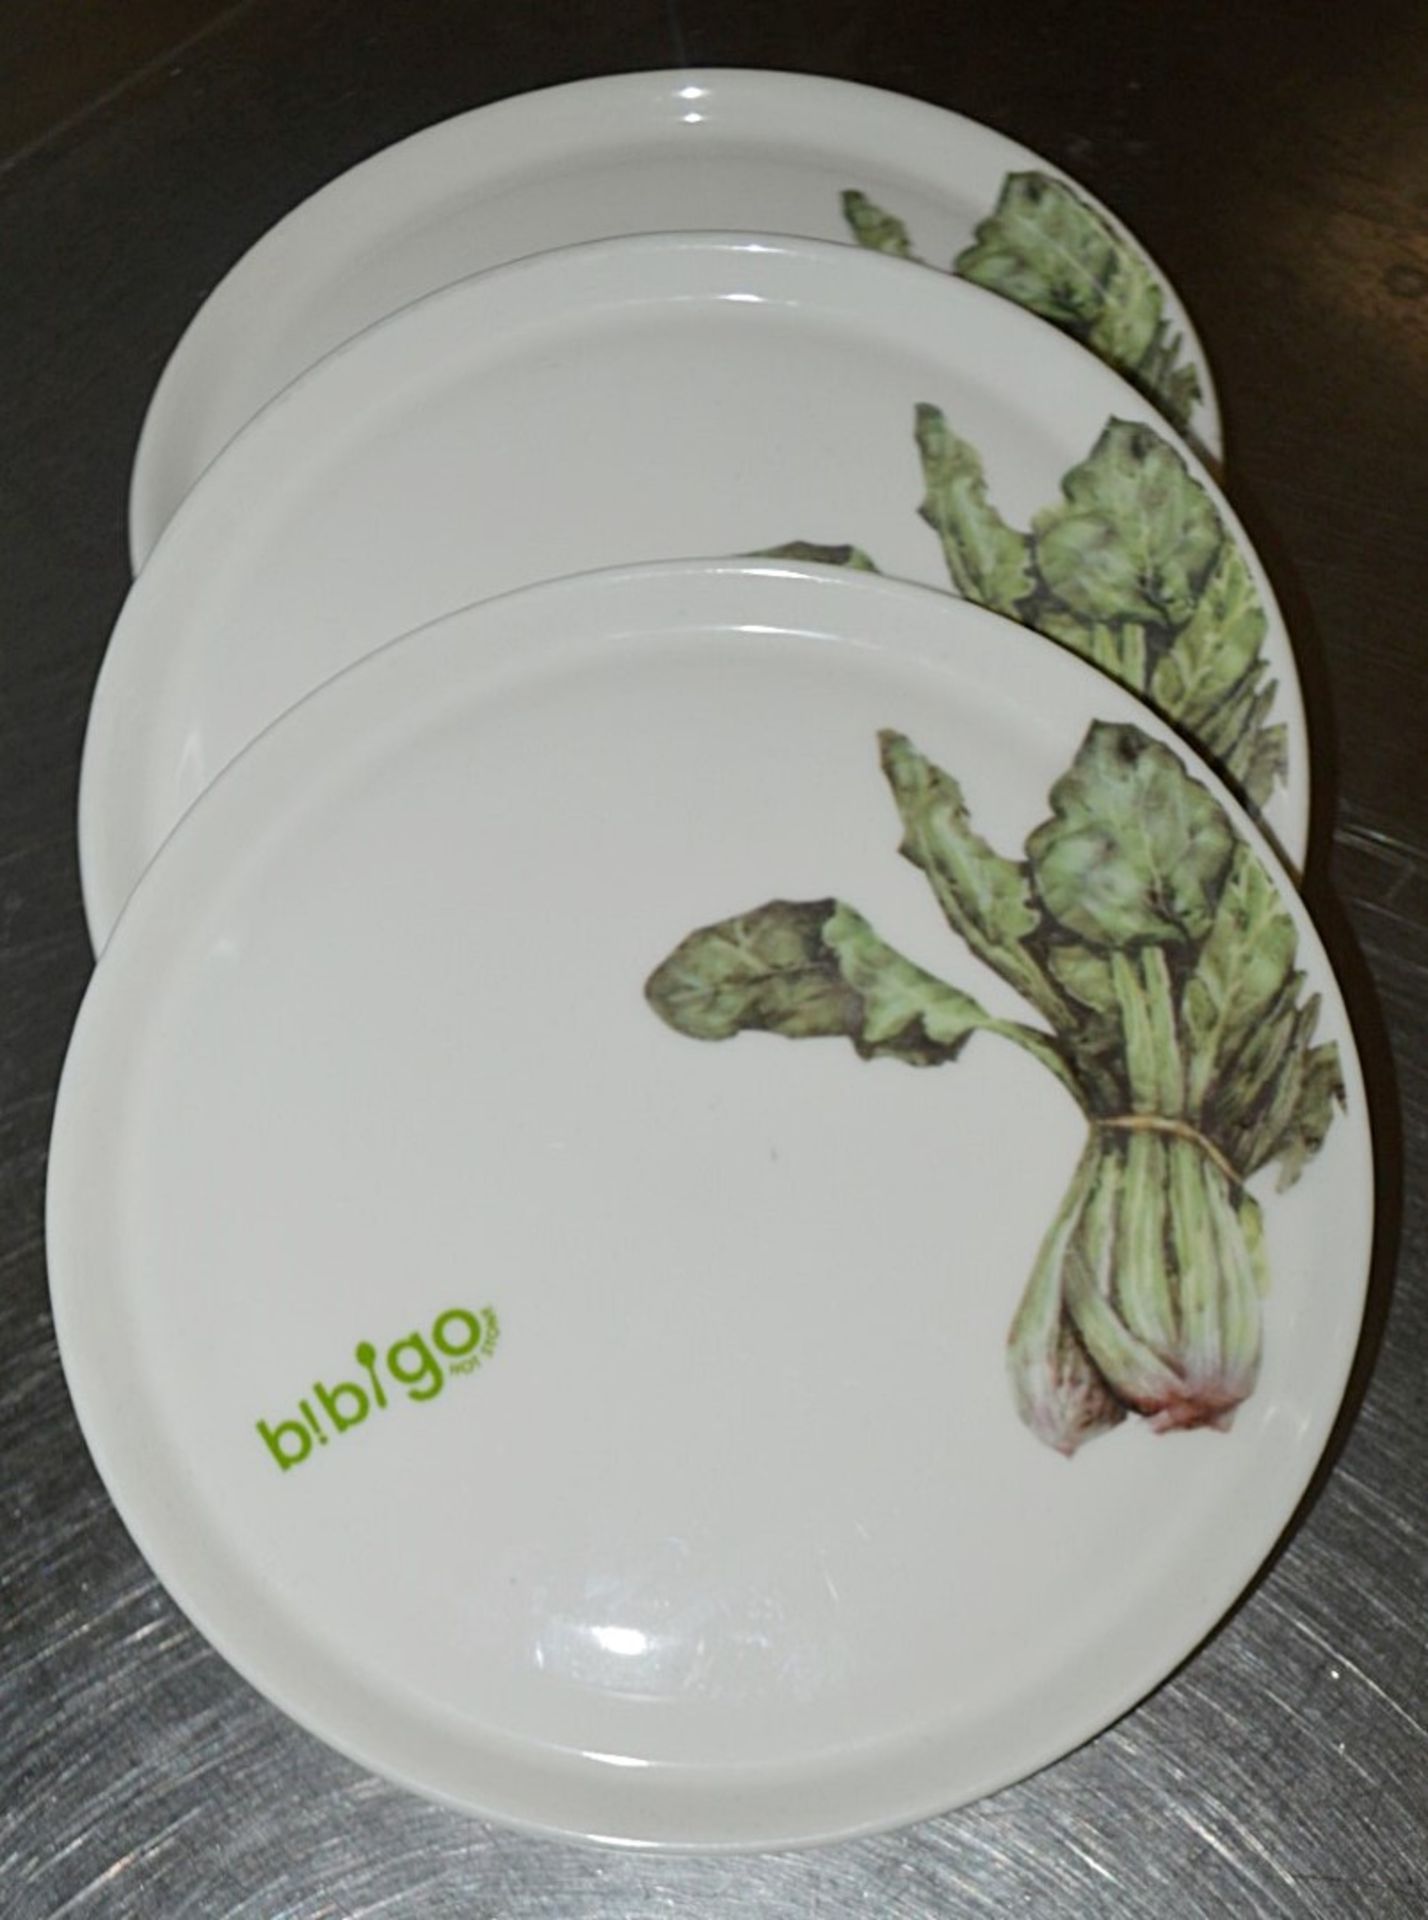 50 x BIBIGO Branded Fine Dining Plates - 16.5cm - Pre-owned, From A London Restaurant - Ref: WH1 - Image 4 of 5